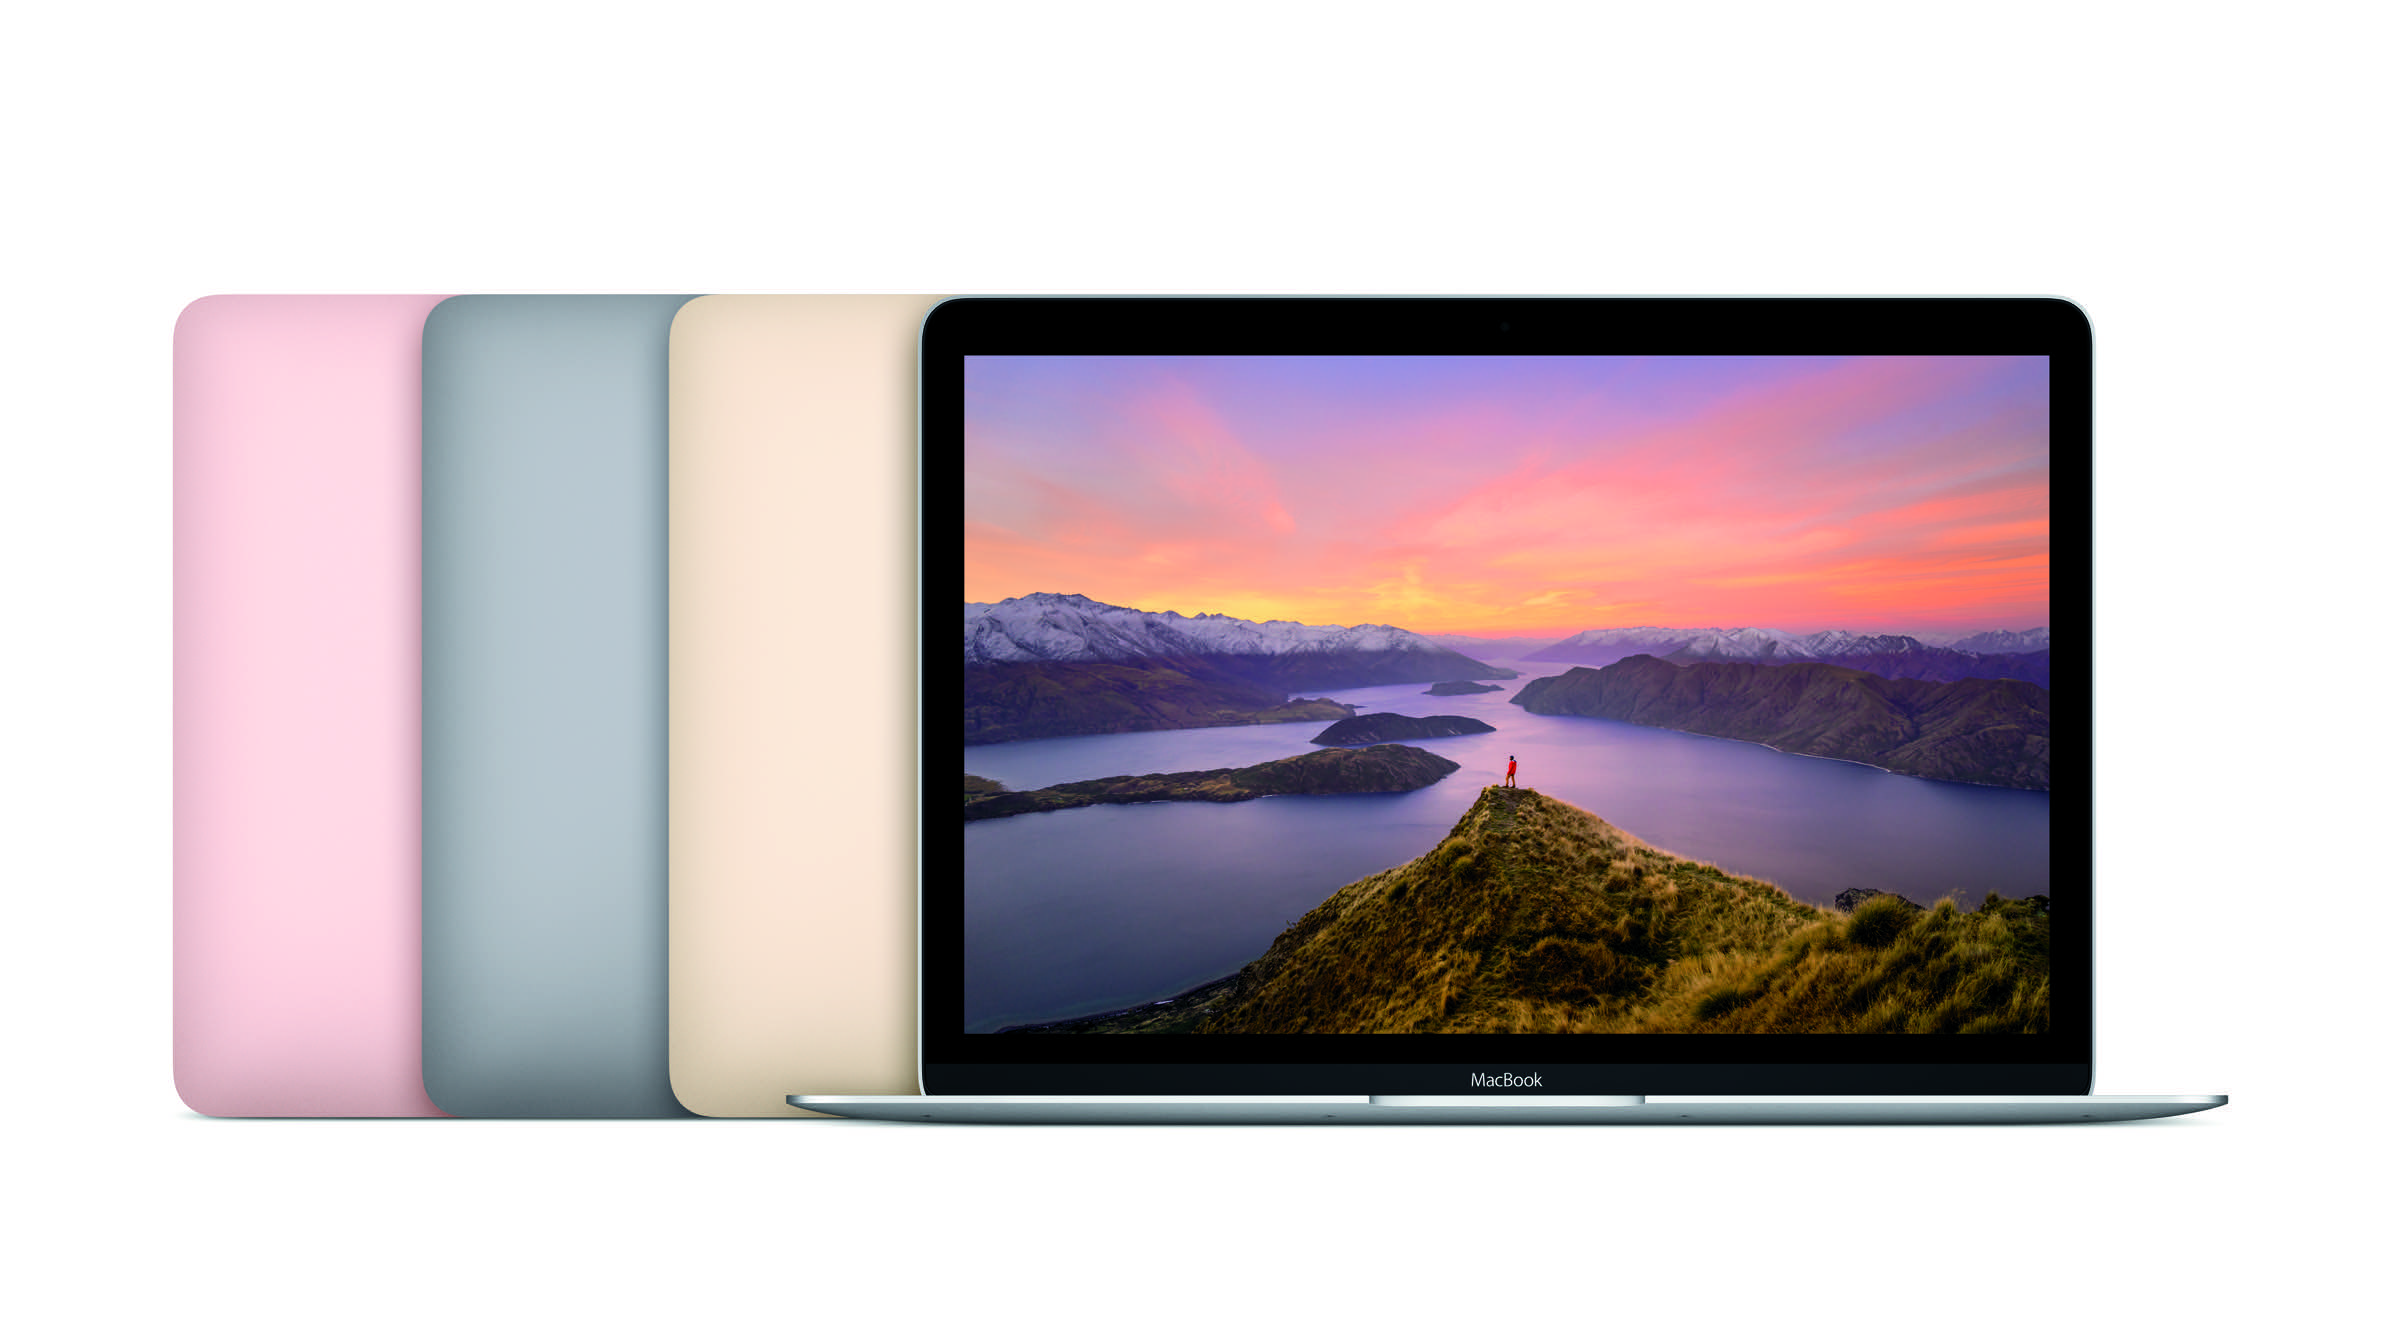 Here's how Apple's refreshed 12-inch MacBook compares to last